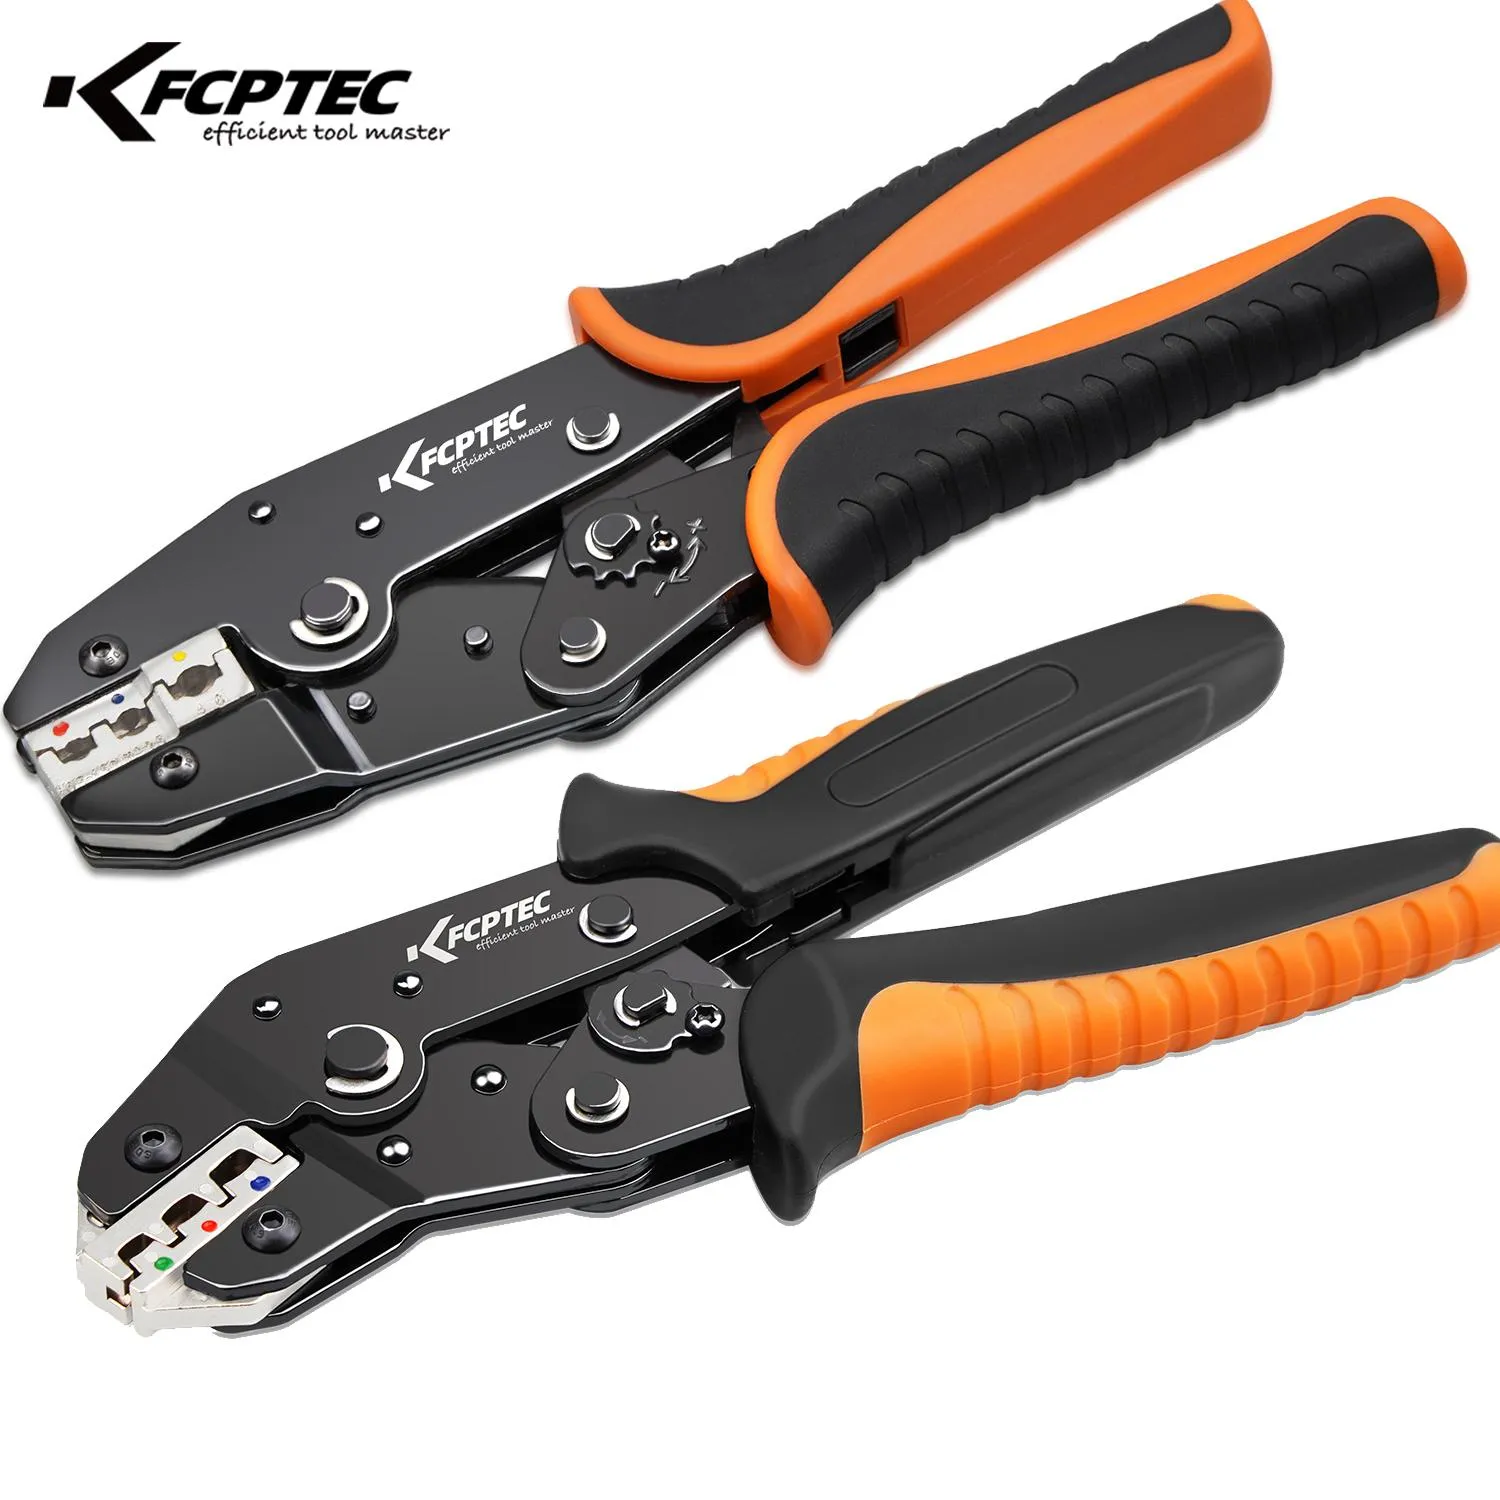 Tang Crimping Pliers Set for Insulation Terminals Electrical Clamp Min Tools Hand Heat Shrink Connector Crimper Tool Kit